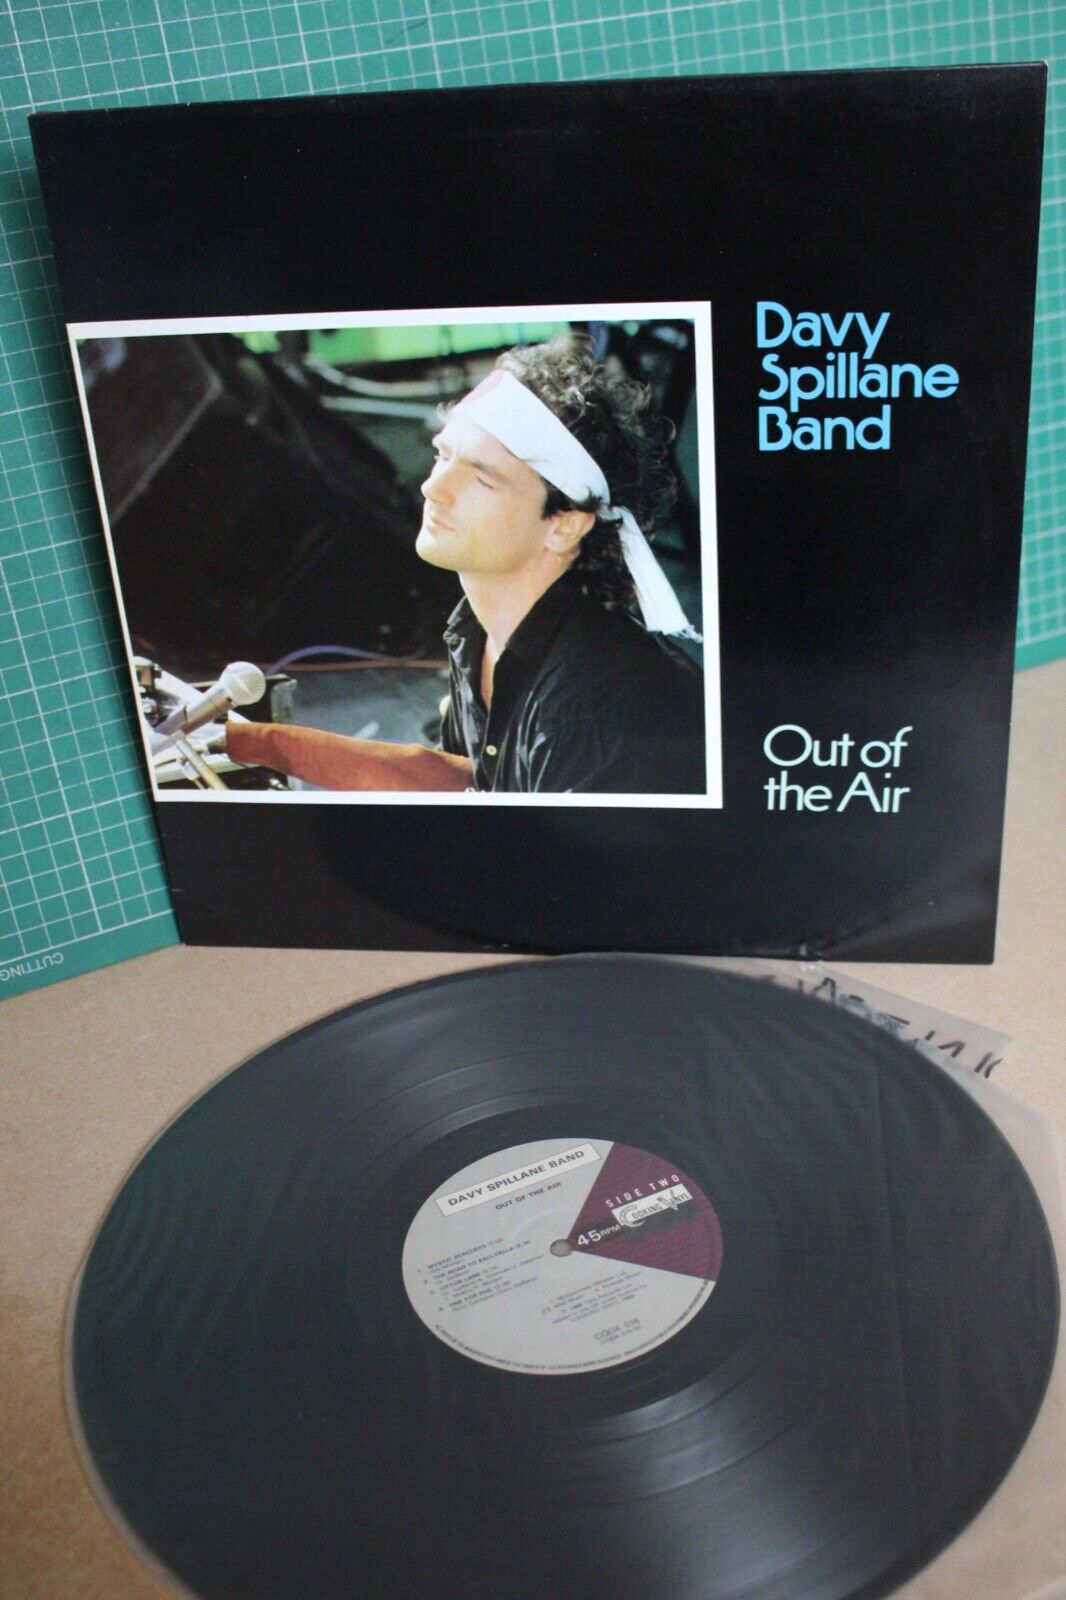 DAVY SPILLANE BAND: "OUT OF THE AIR" 1989 COOKING VINYL LP